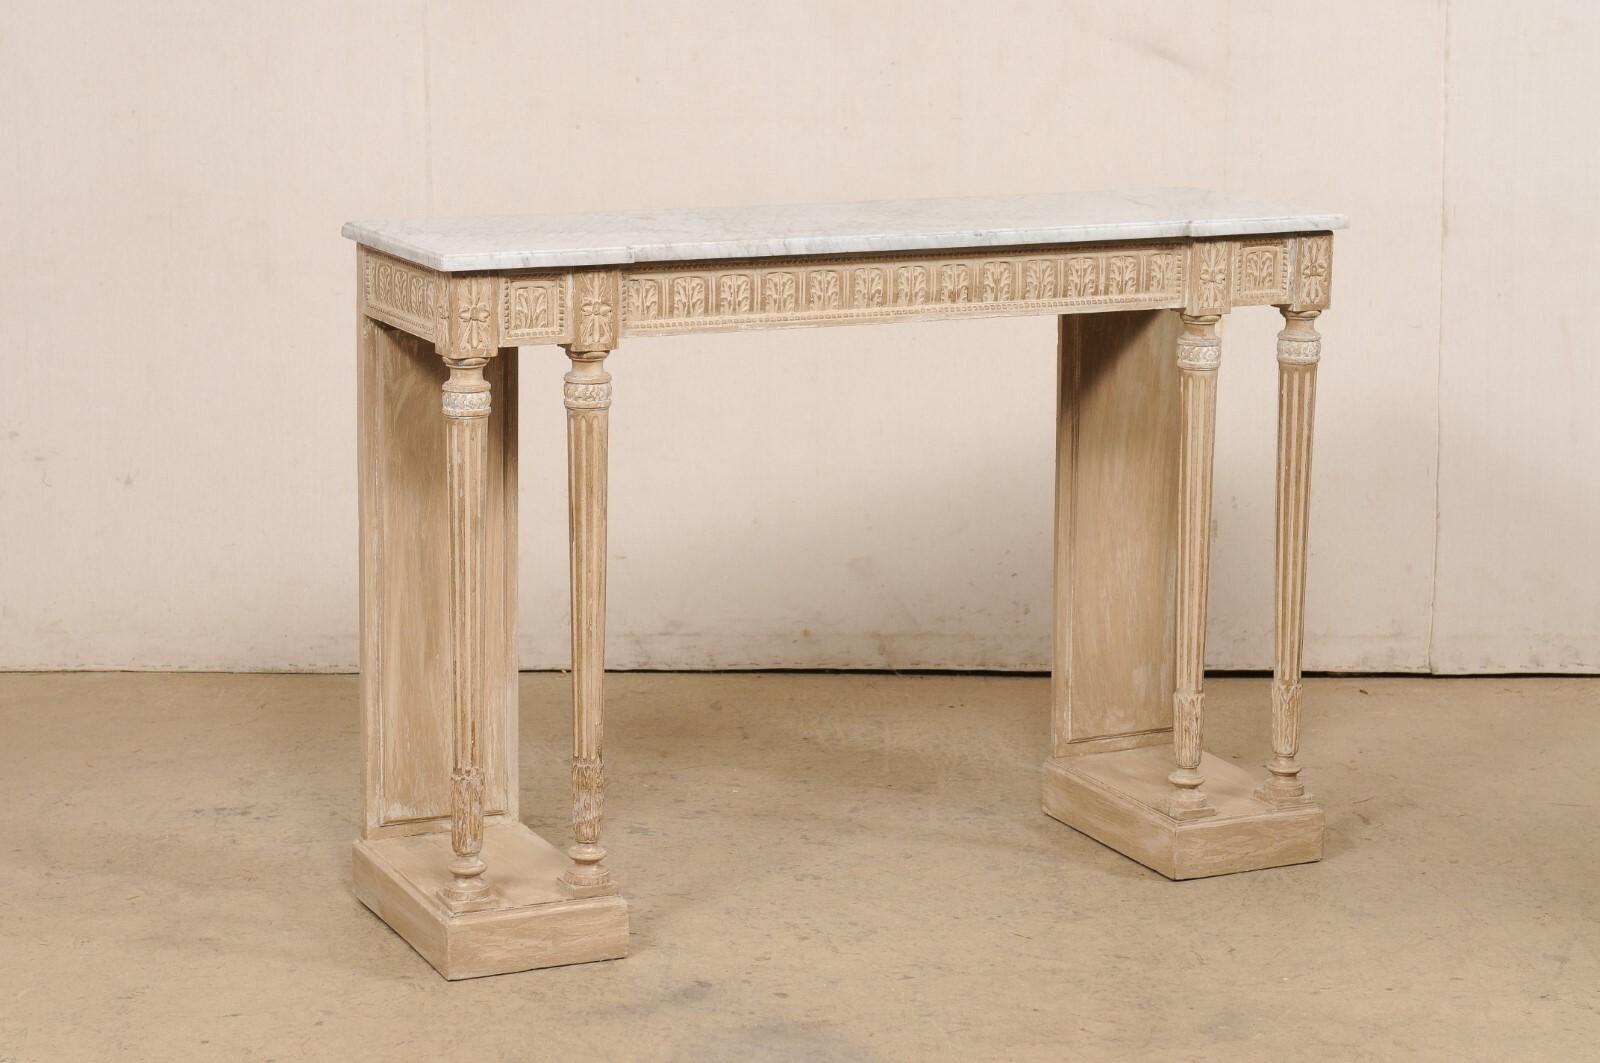 A French carved-wood console table with its original marble top, from the 19th century. This antique table from France features a slender, rectangular-shaped white/grey marble top, with a subtle reverse breakfront design at front, which rests upon